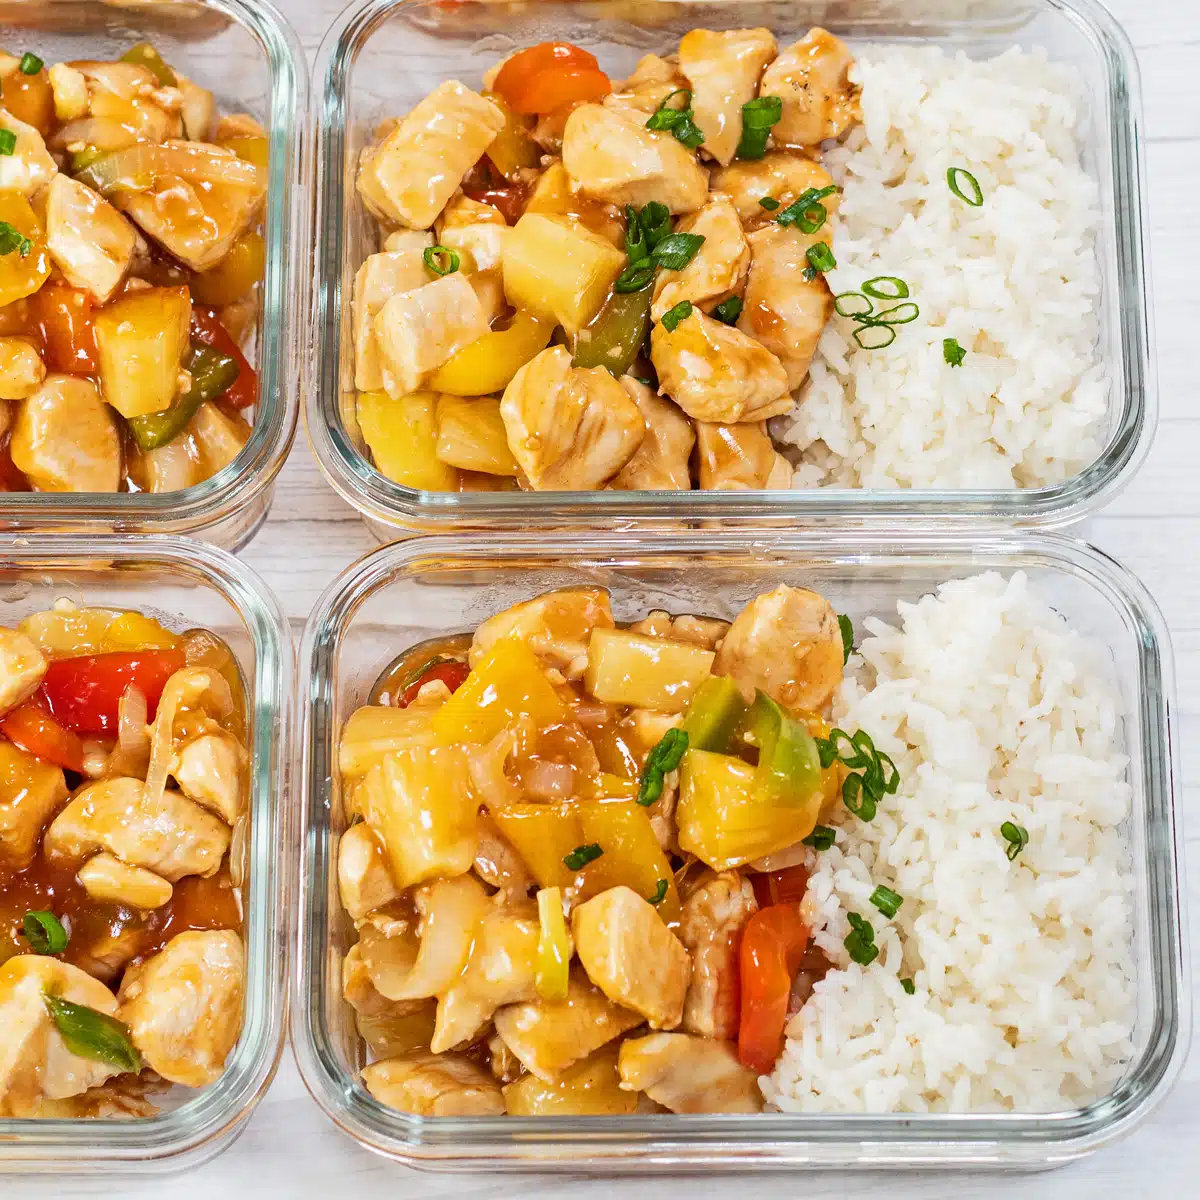 Best meal prep sweet and sour chicken recipe to make in advance for high protein dishes after workouts.